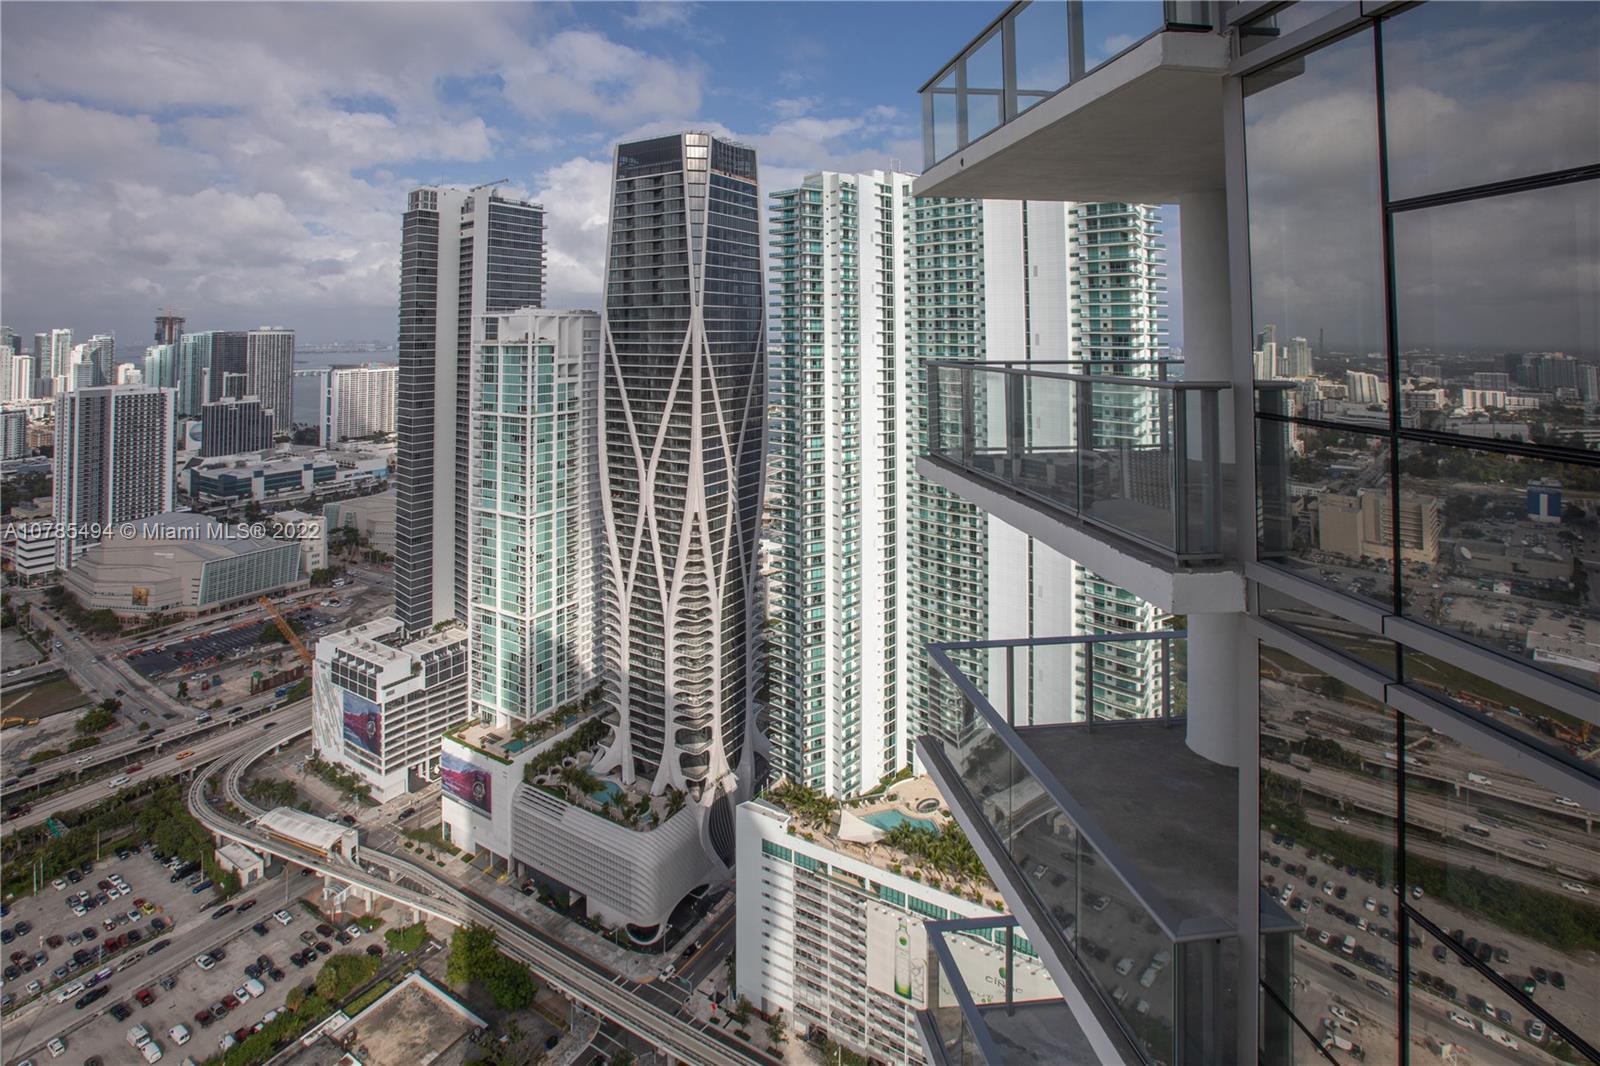 Paramount Conveniently located next to interstate 95 and 395, several metromover stations, and adjac